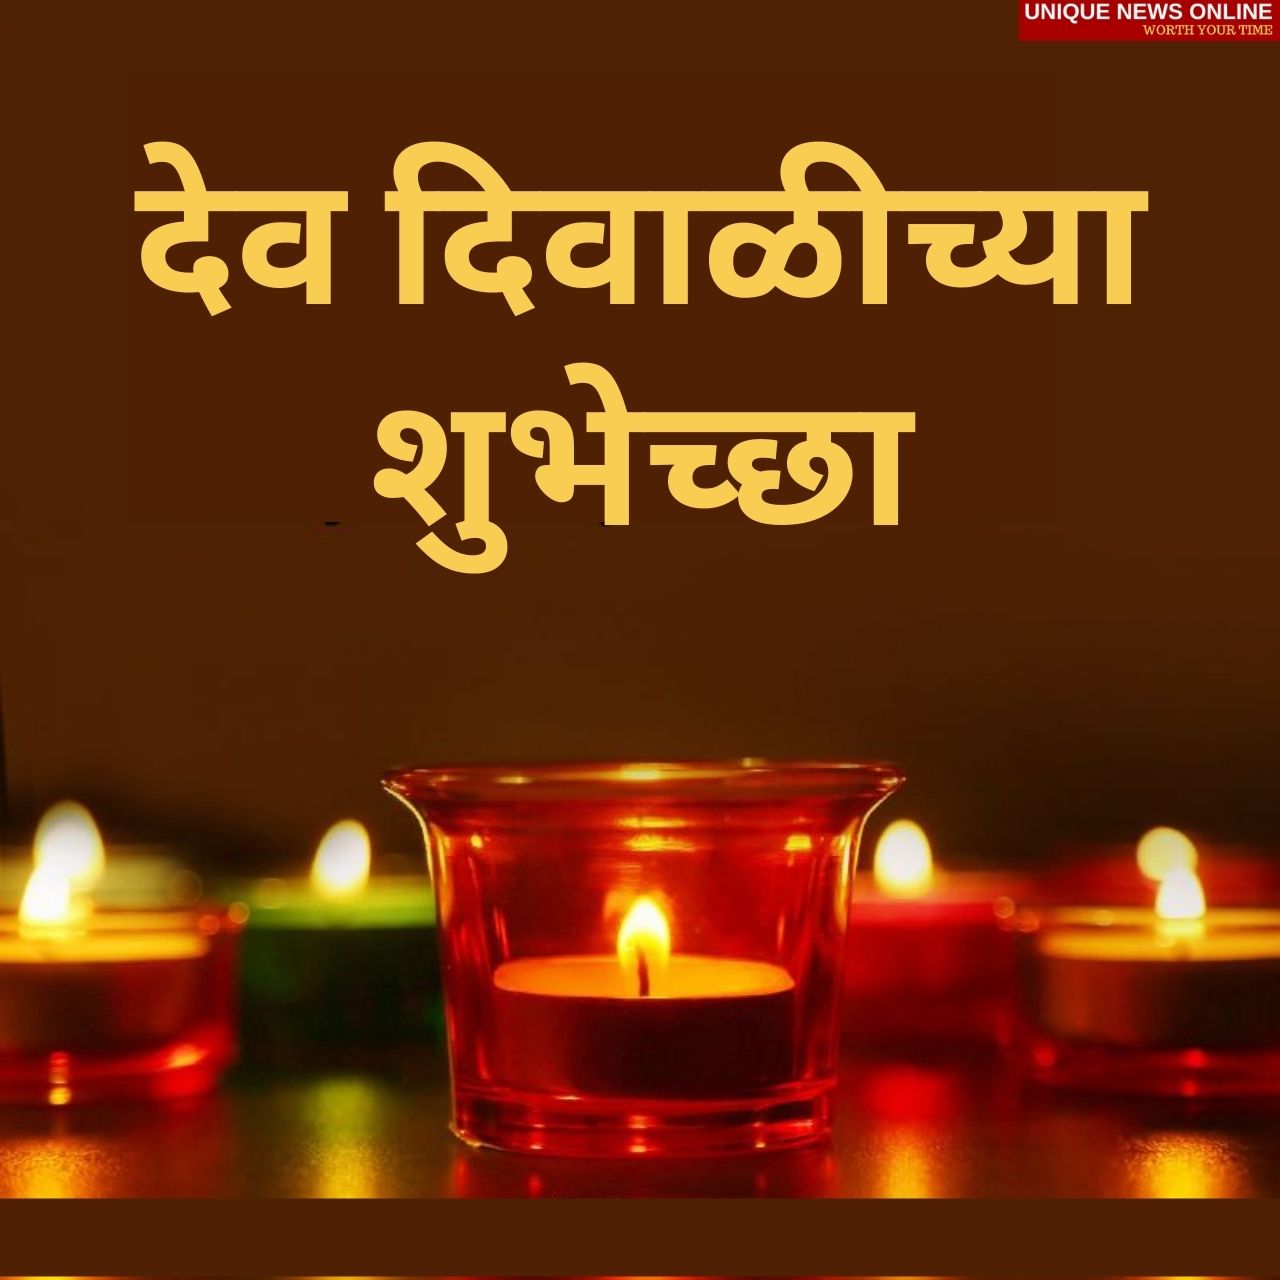 Happy Dev Diwali 2021 Marathi Wishes, Quotes, HD Images, Messages, and greetings to Share